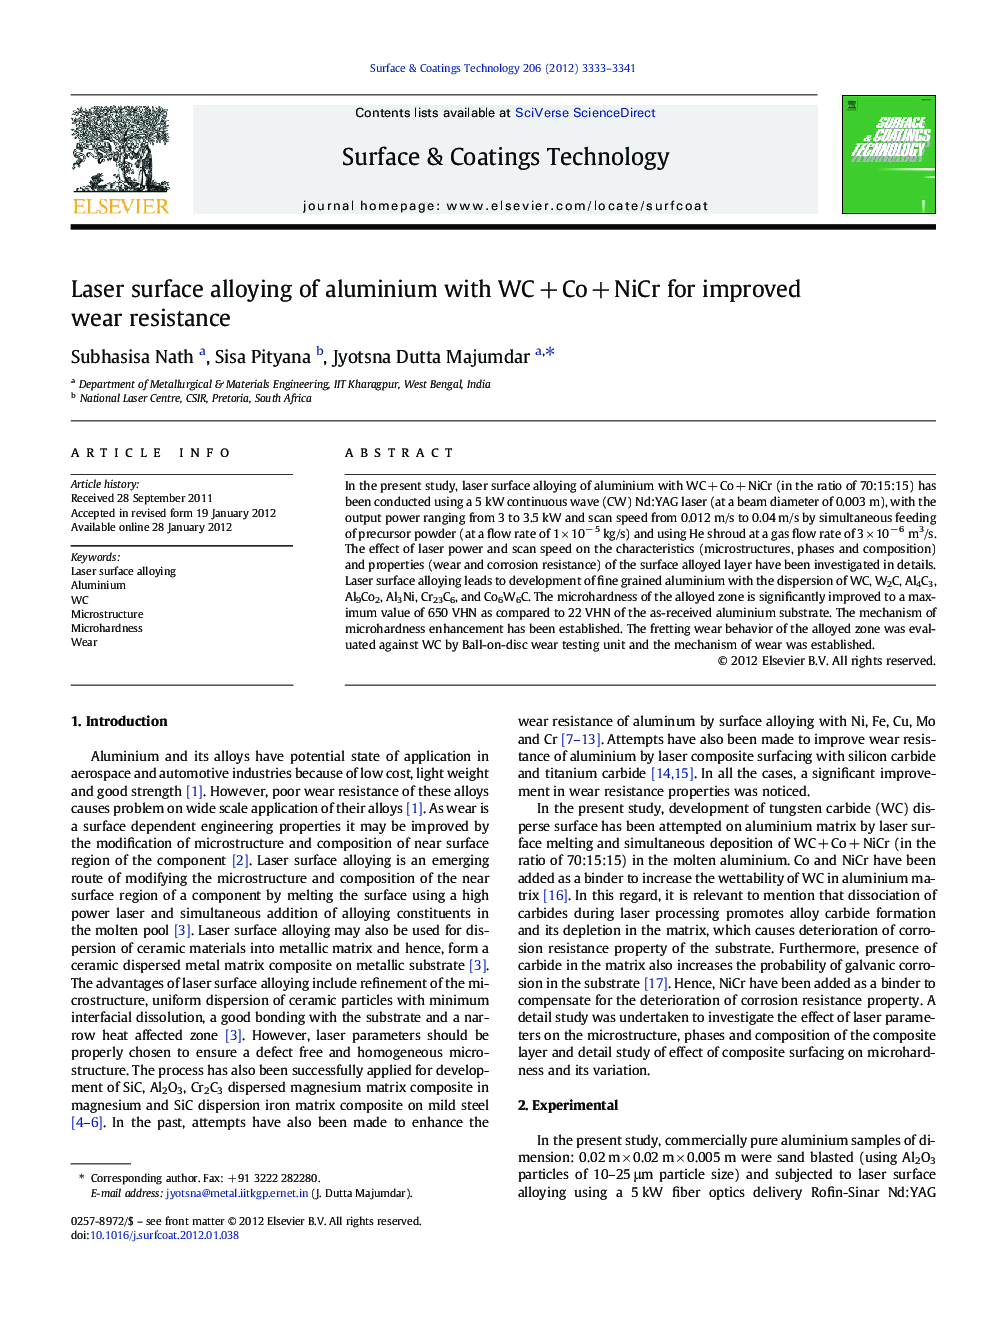 Laser surface alloying of aluminium with WC + Co + NiCr for improved wear resistance